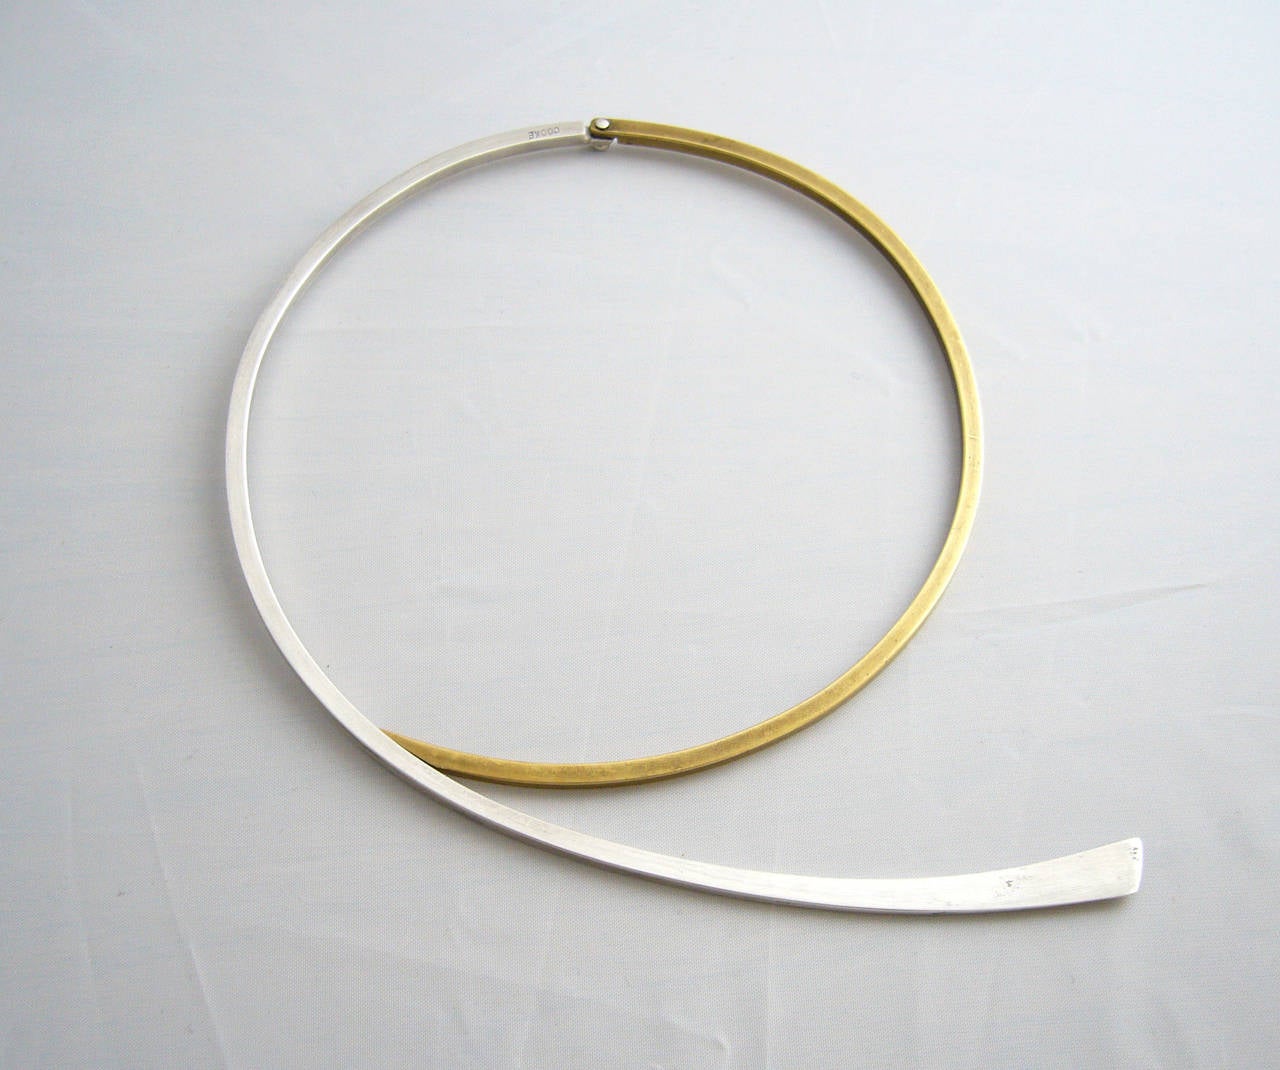 A hinged choker of sterling silver and brass made by Betty Cooke of Baltimore, Maryland.  Simplistic and classic in form, necklace has a wearable neck length of 15